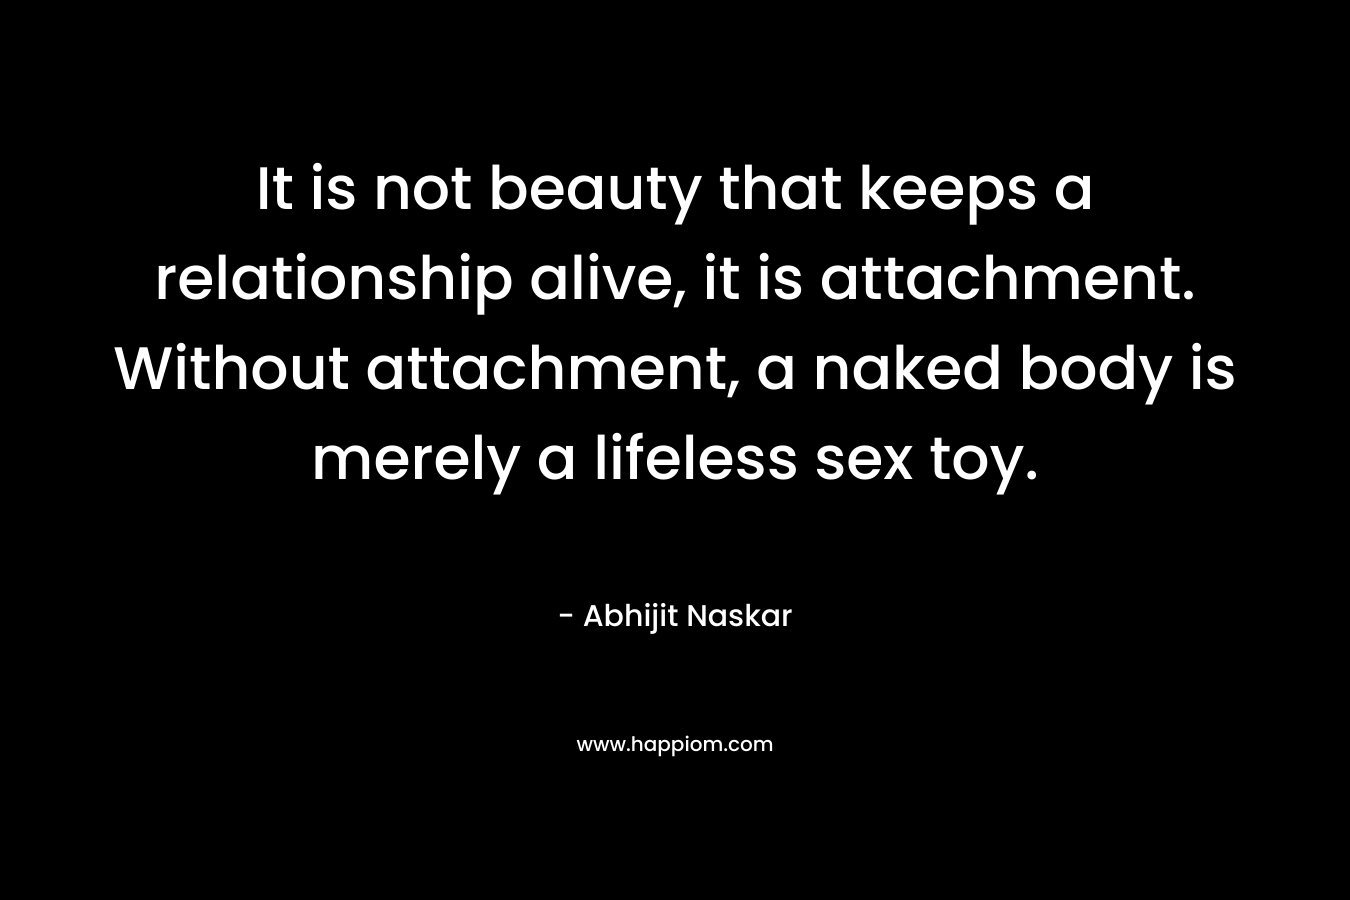 It is not beauty that keeps a relationship alive, it is attachment. Without attachment, a naked body is merely a lifeless sex toy.